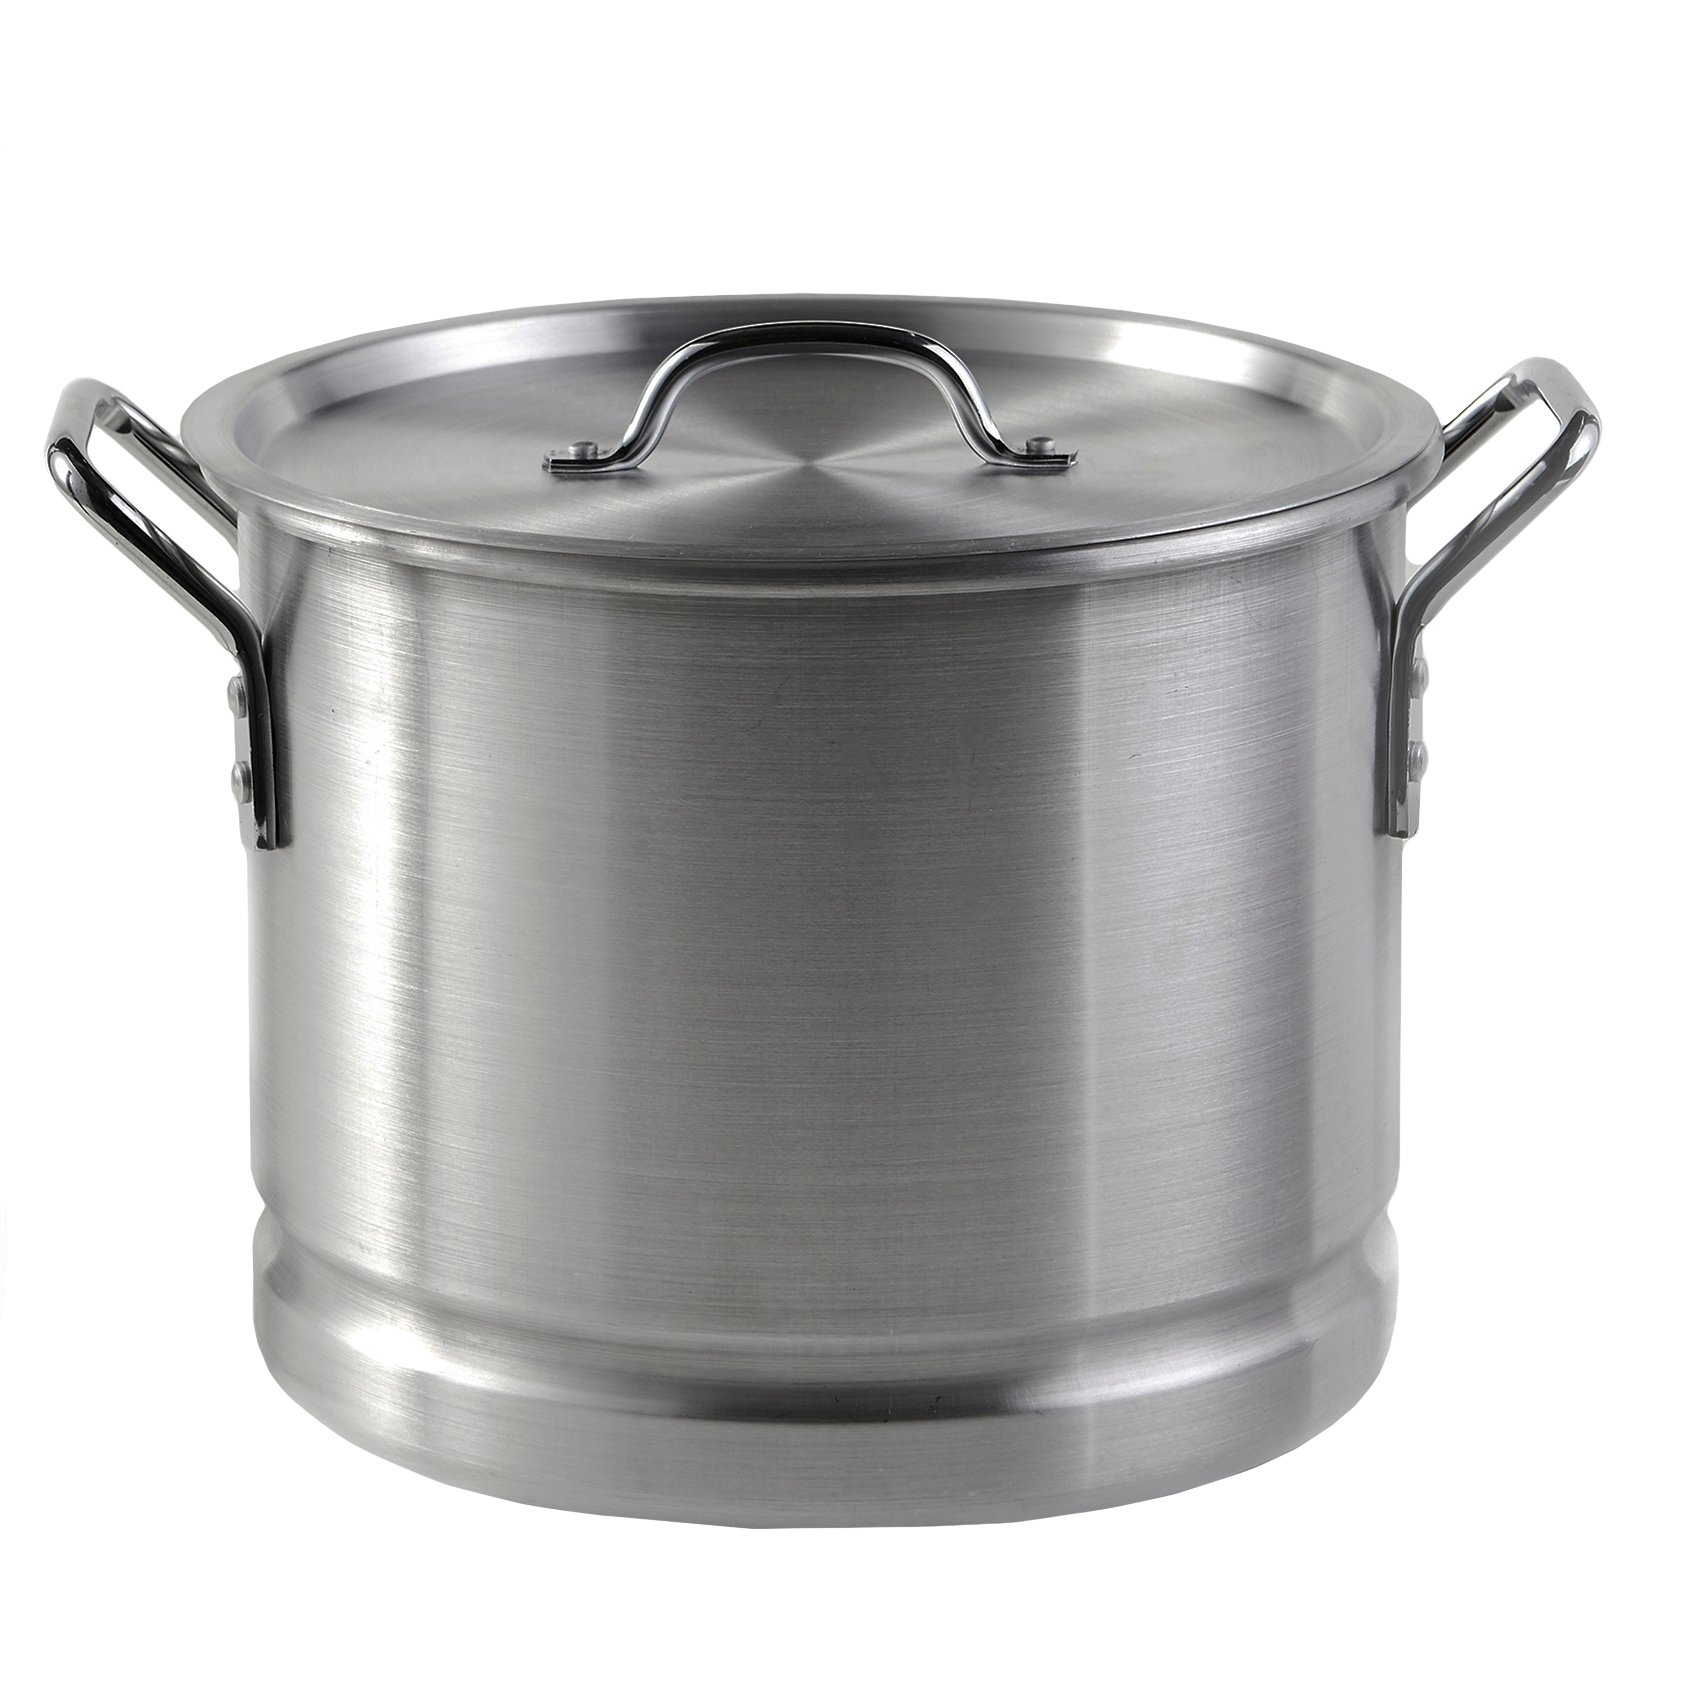 IMUSA tamale pot and steamer (30.2 Lts) – Mi Sabor a Colombia